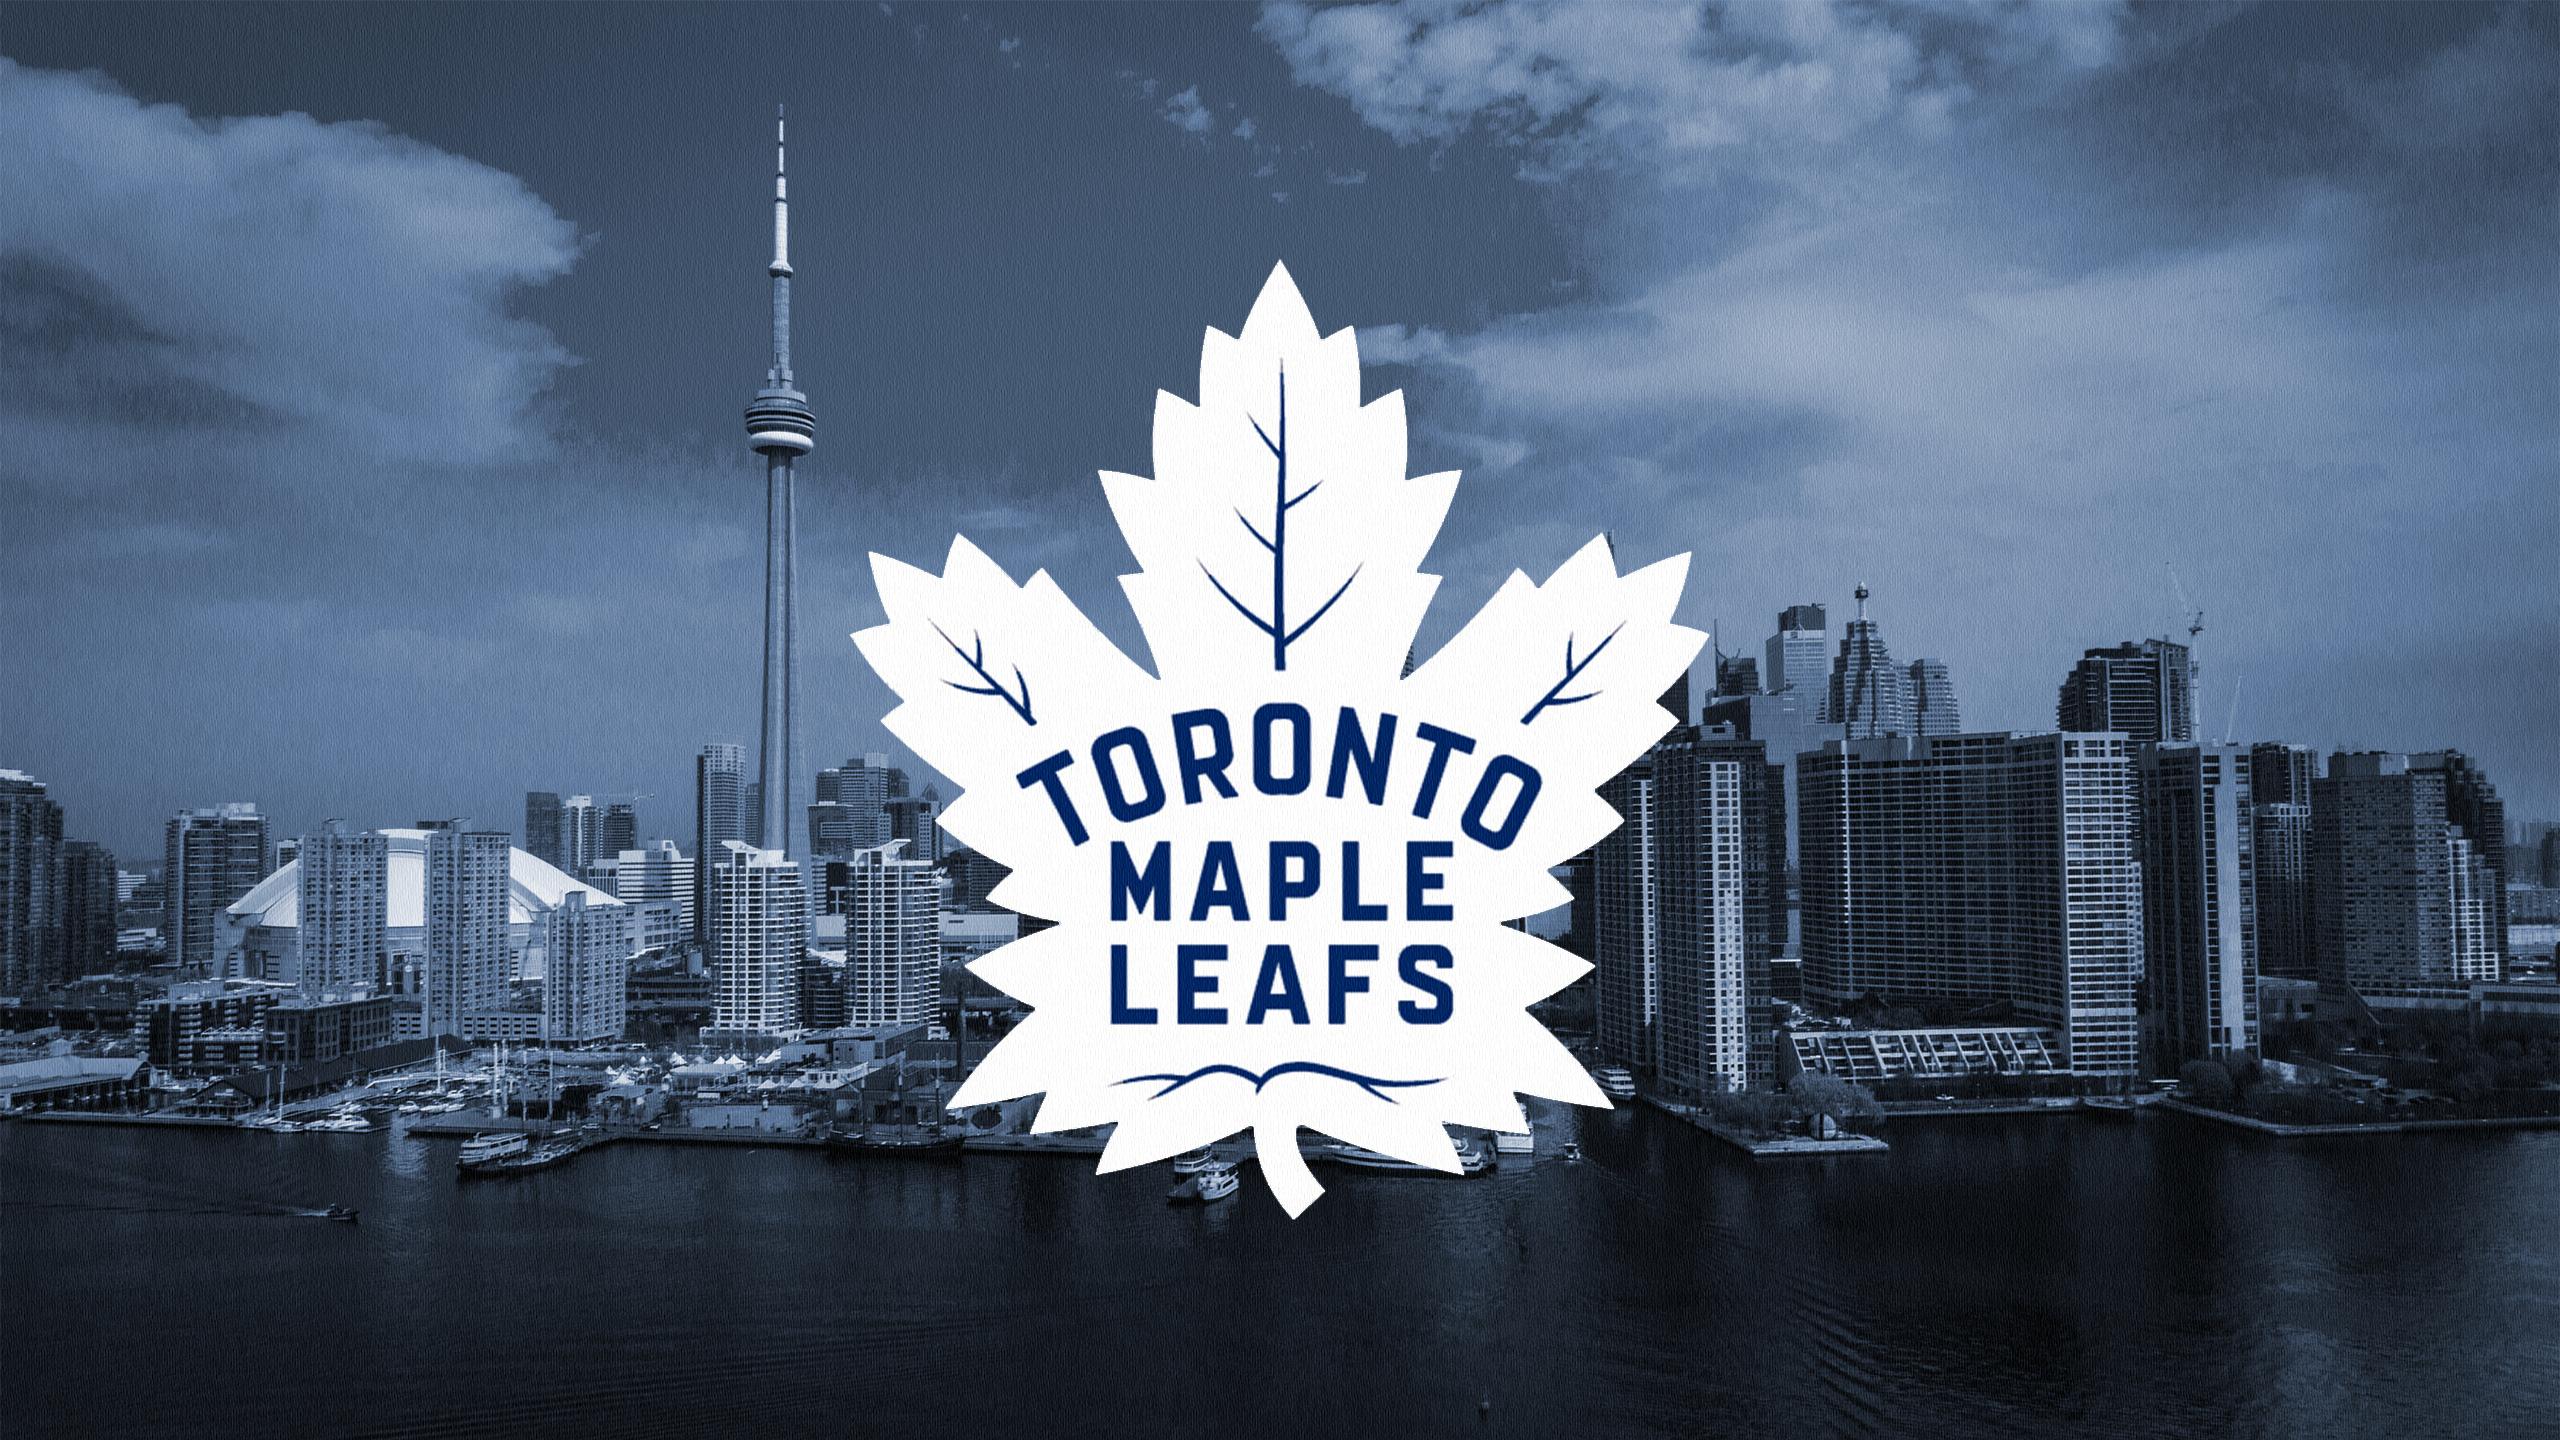 Toronto Maple Leafs wallpaper by SolaryFireWater  Download on ZEDGE  3f91